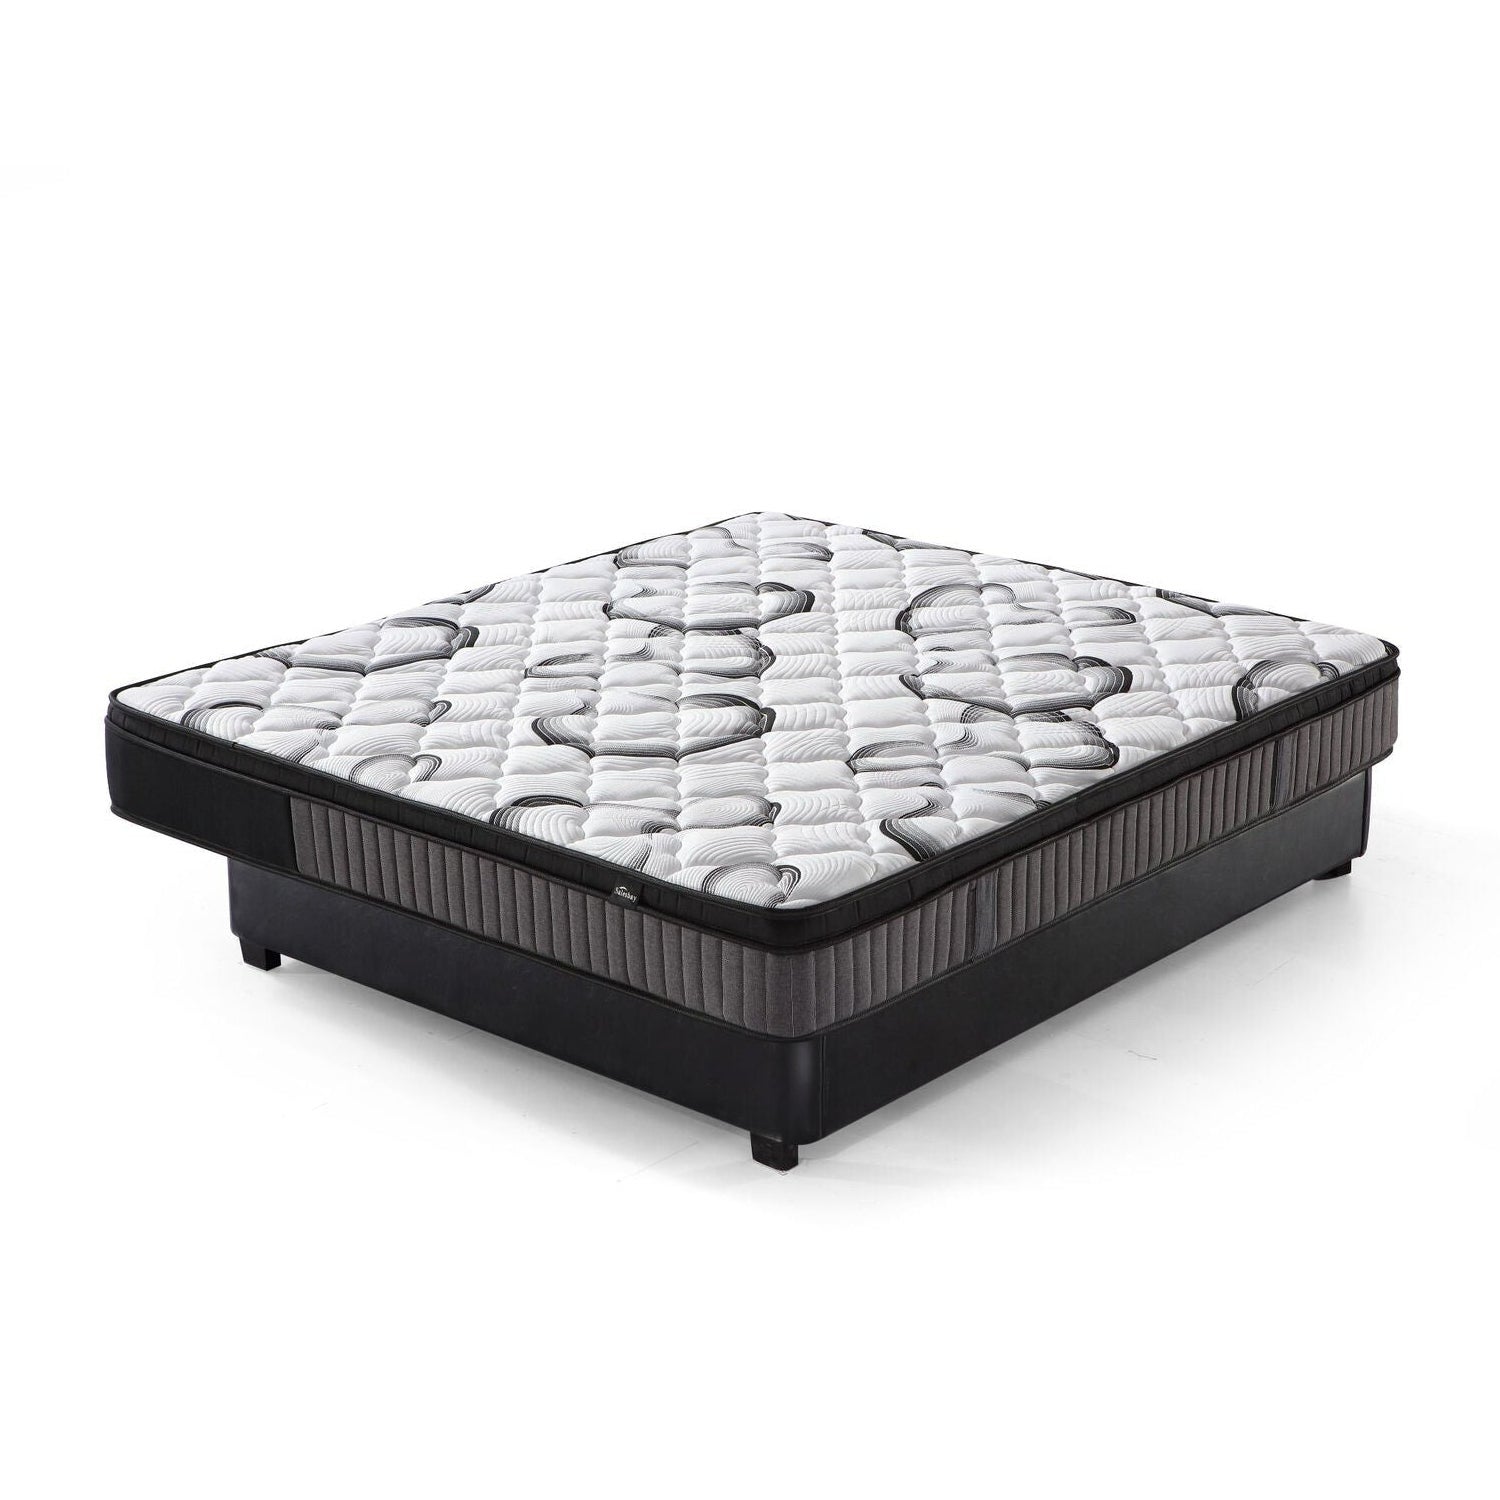 Foret Bed Mattress 9 Zone Euro Top Bedding Foam Super Firm 24cm Single King Single Double Queen King Size